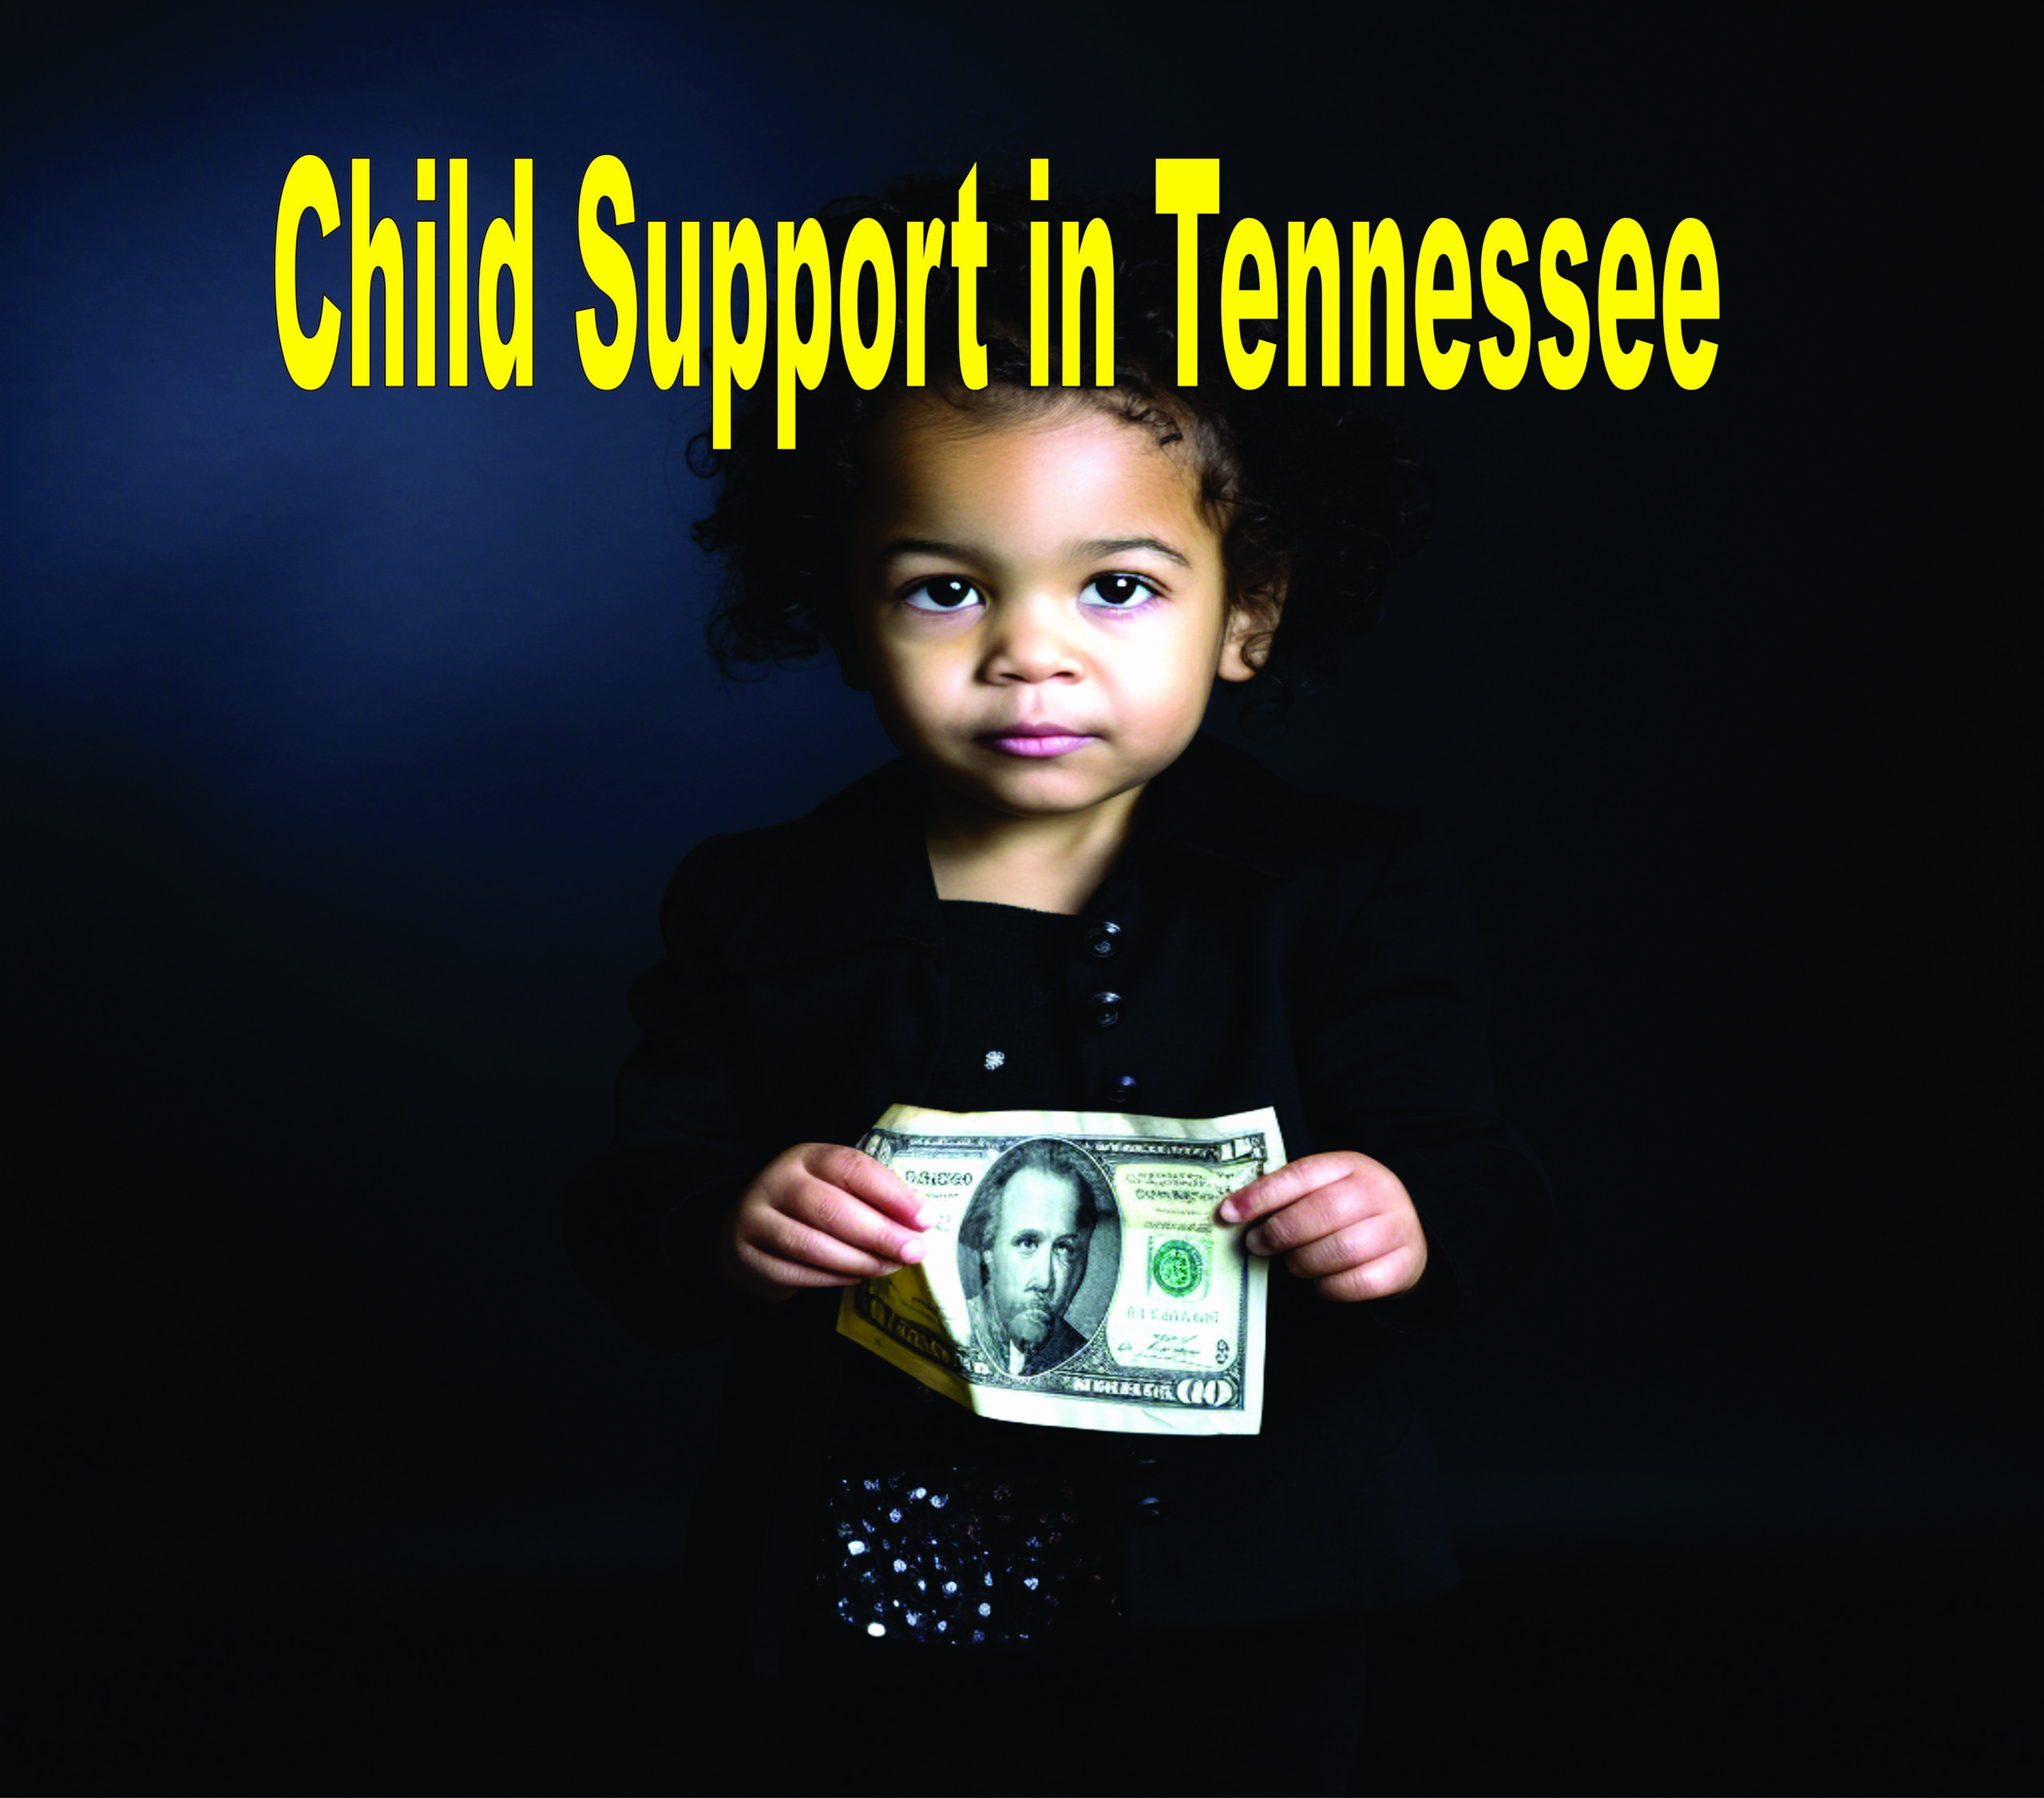 Child Support In Tennessee